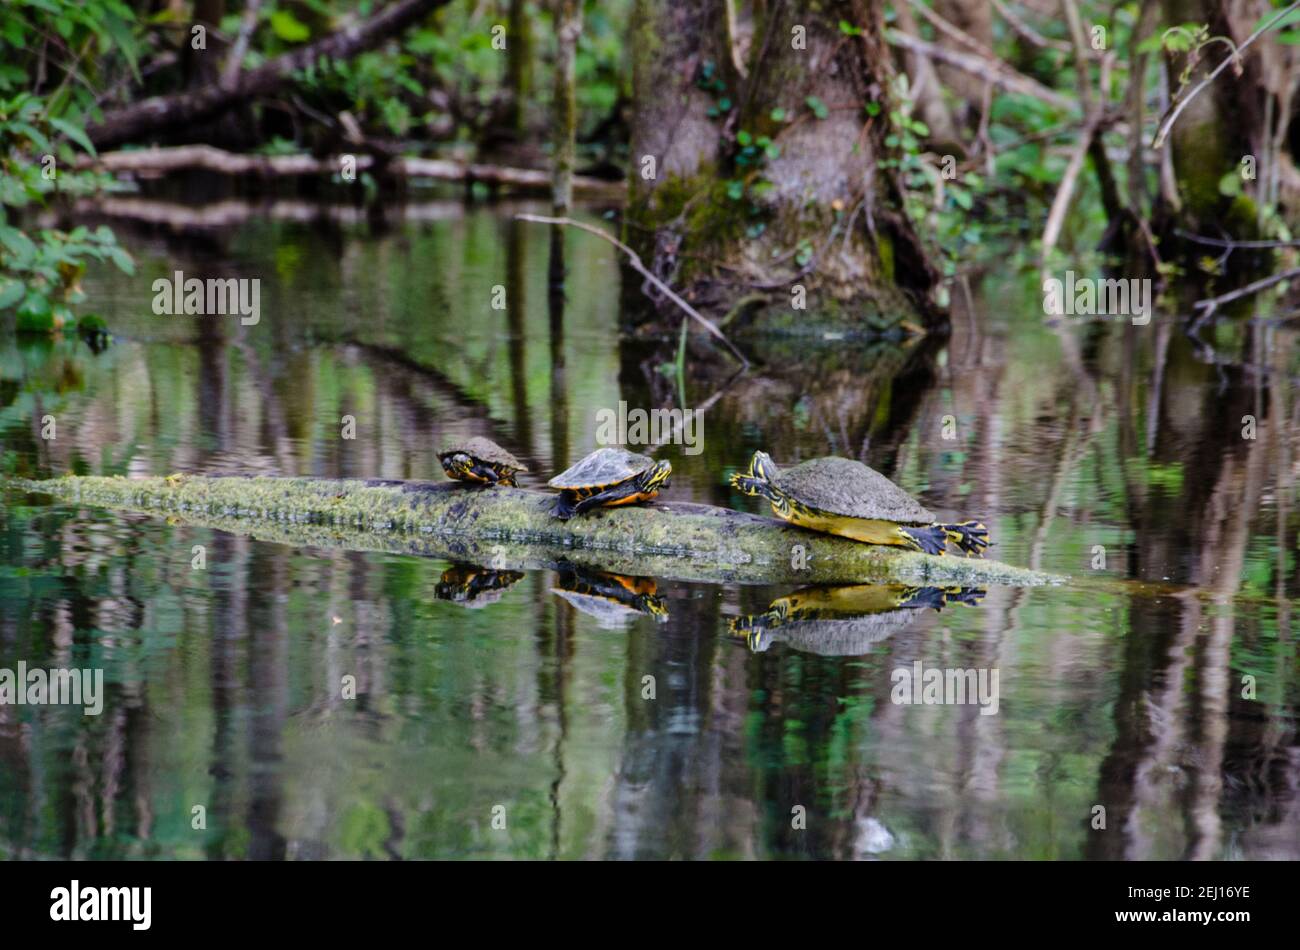 3 Florida red bellied turtles on a log in the Silver River, Florida, USA Stock Photo